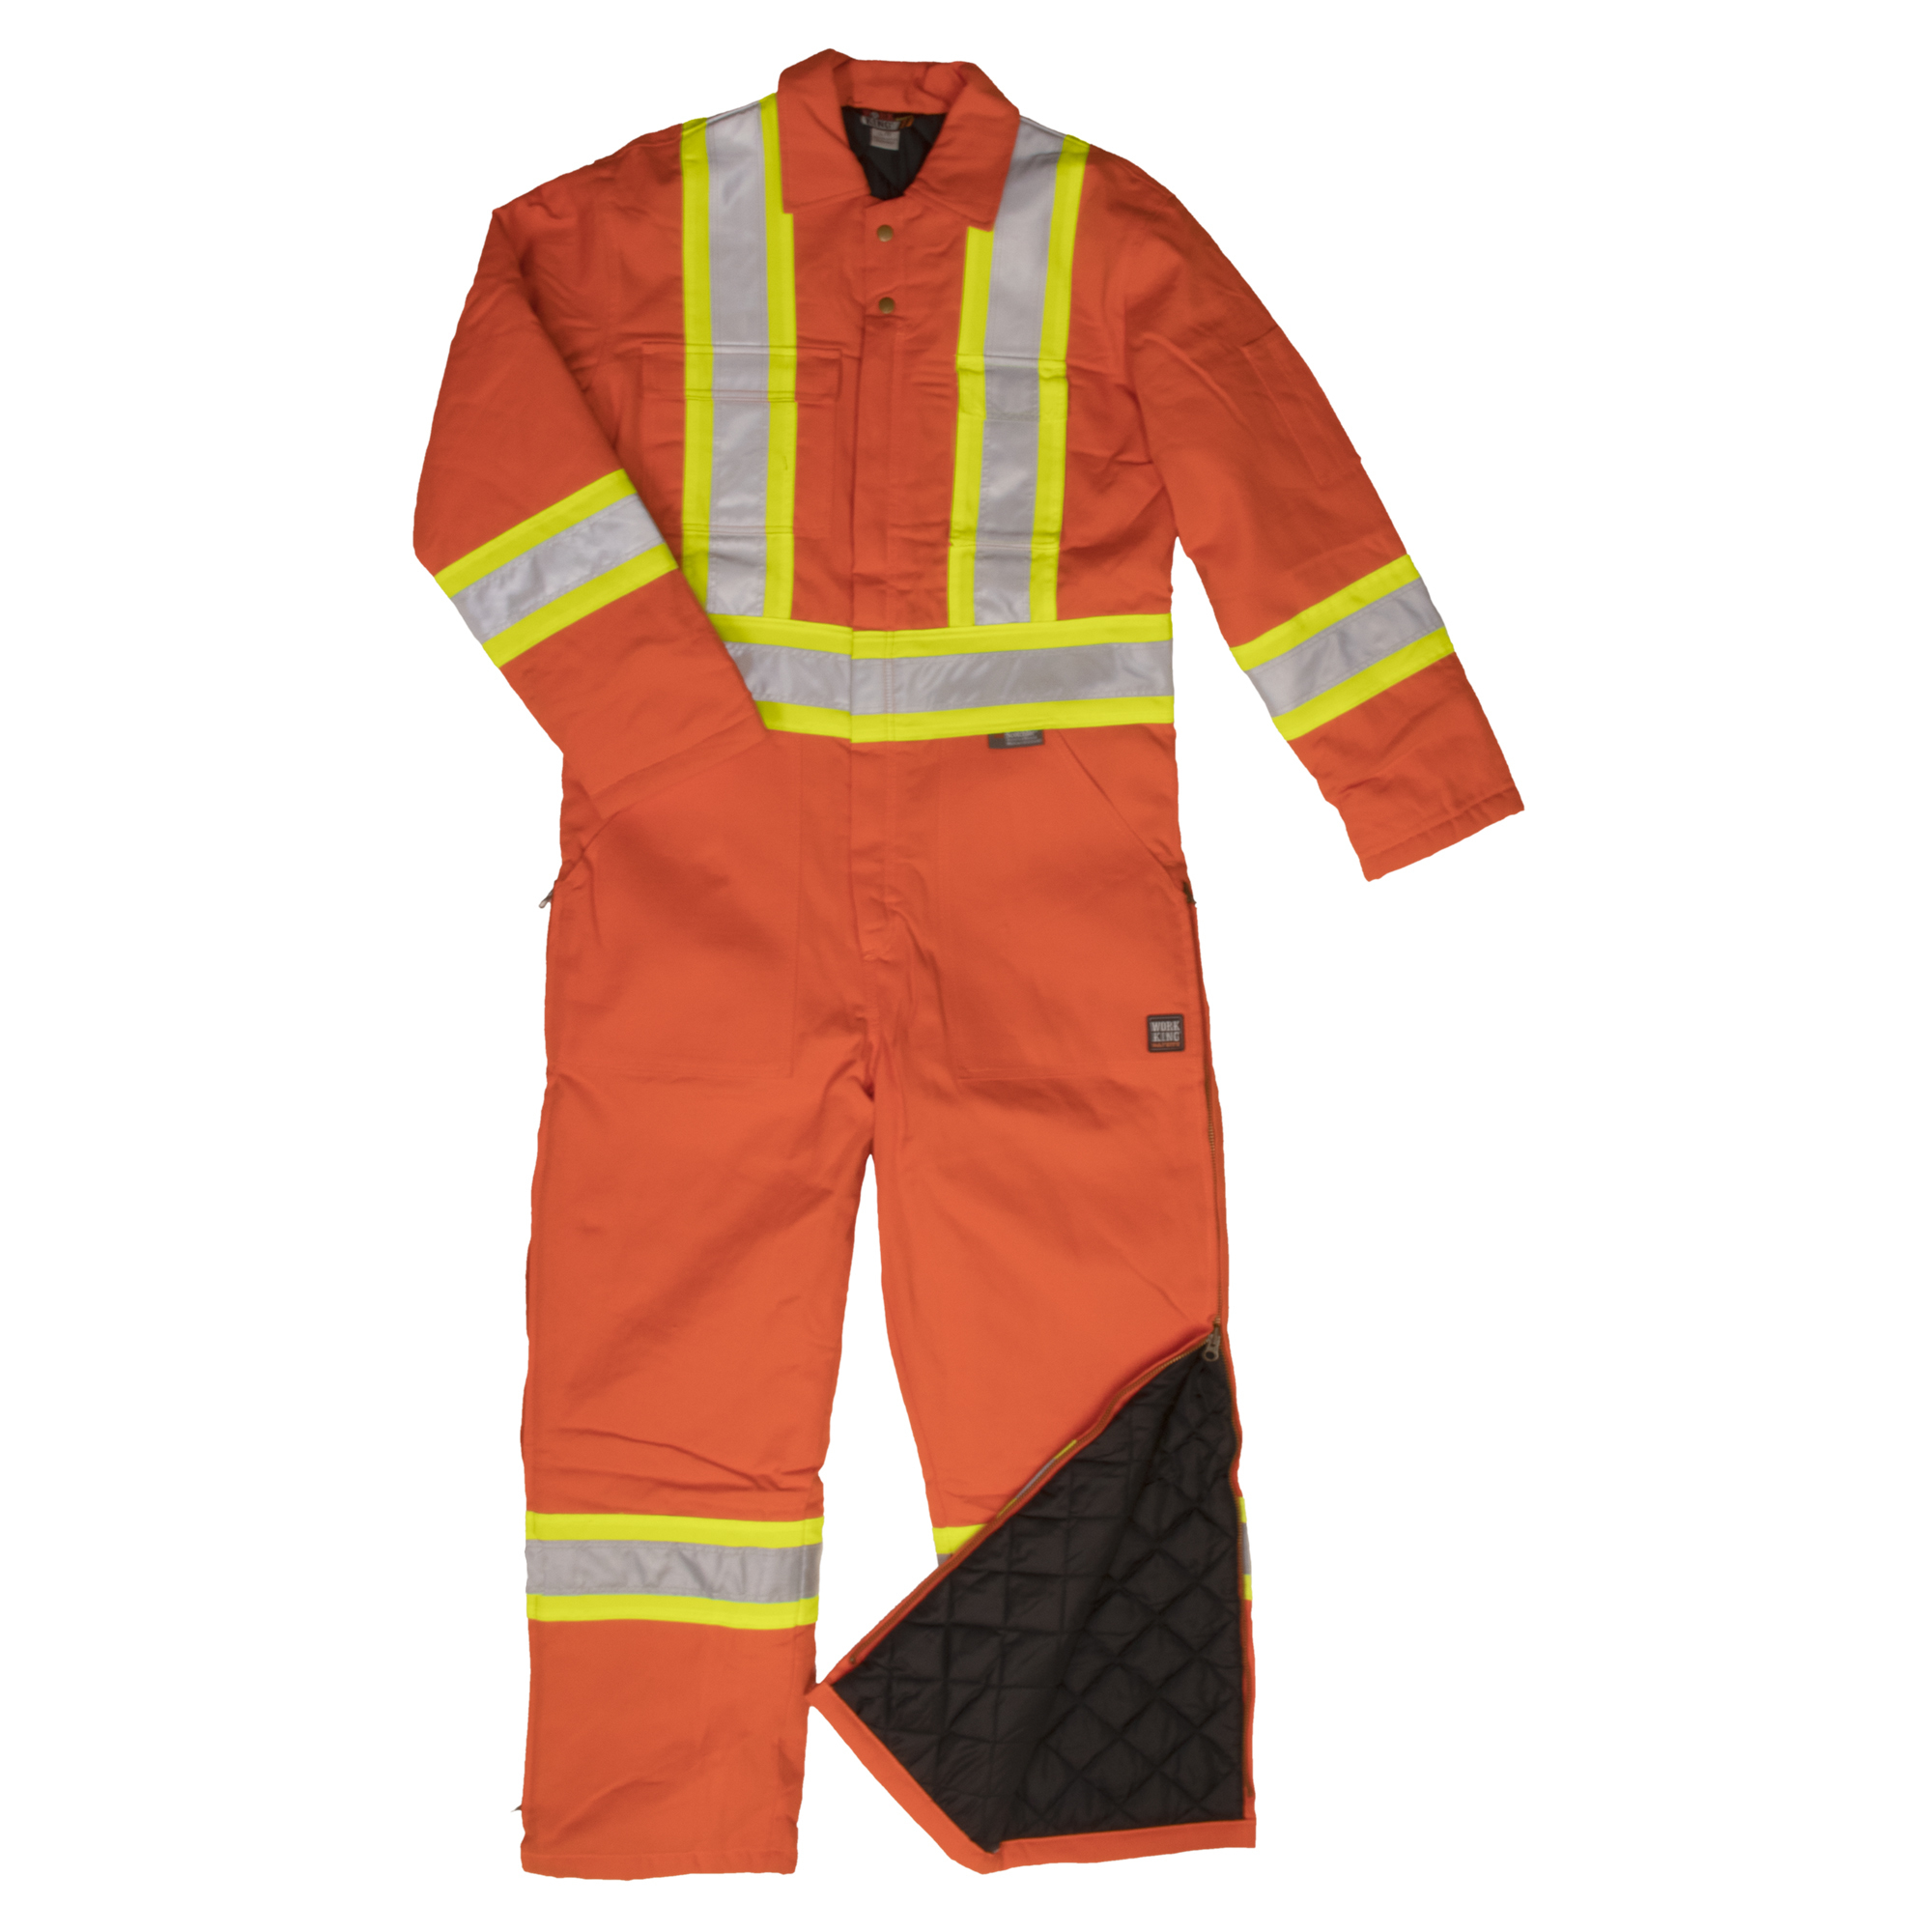 Tough Duck, Insulated Safety Coverall, Size M, Color Orange, Model S78711